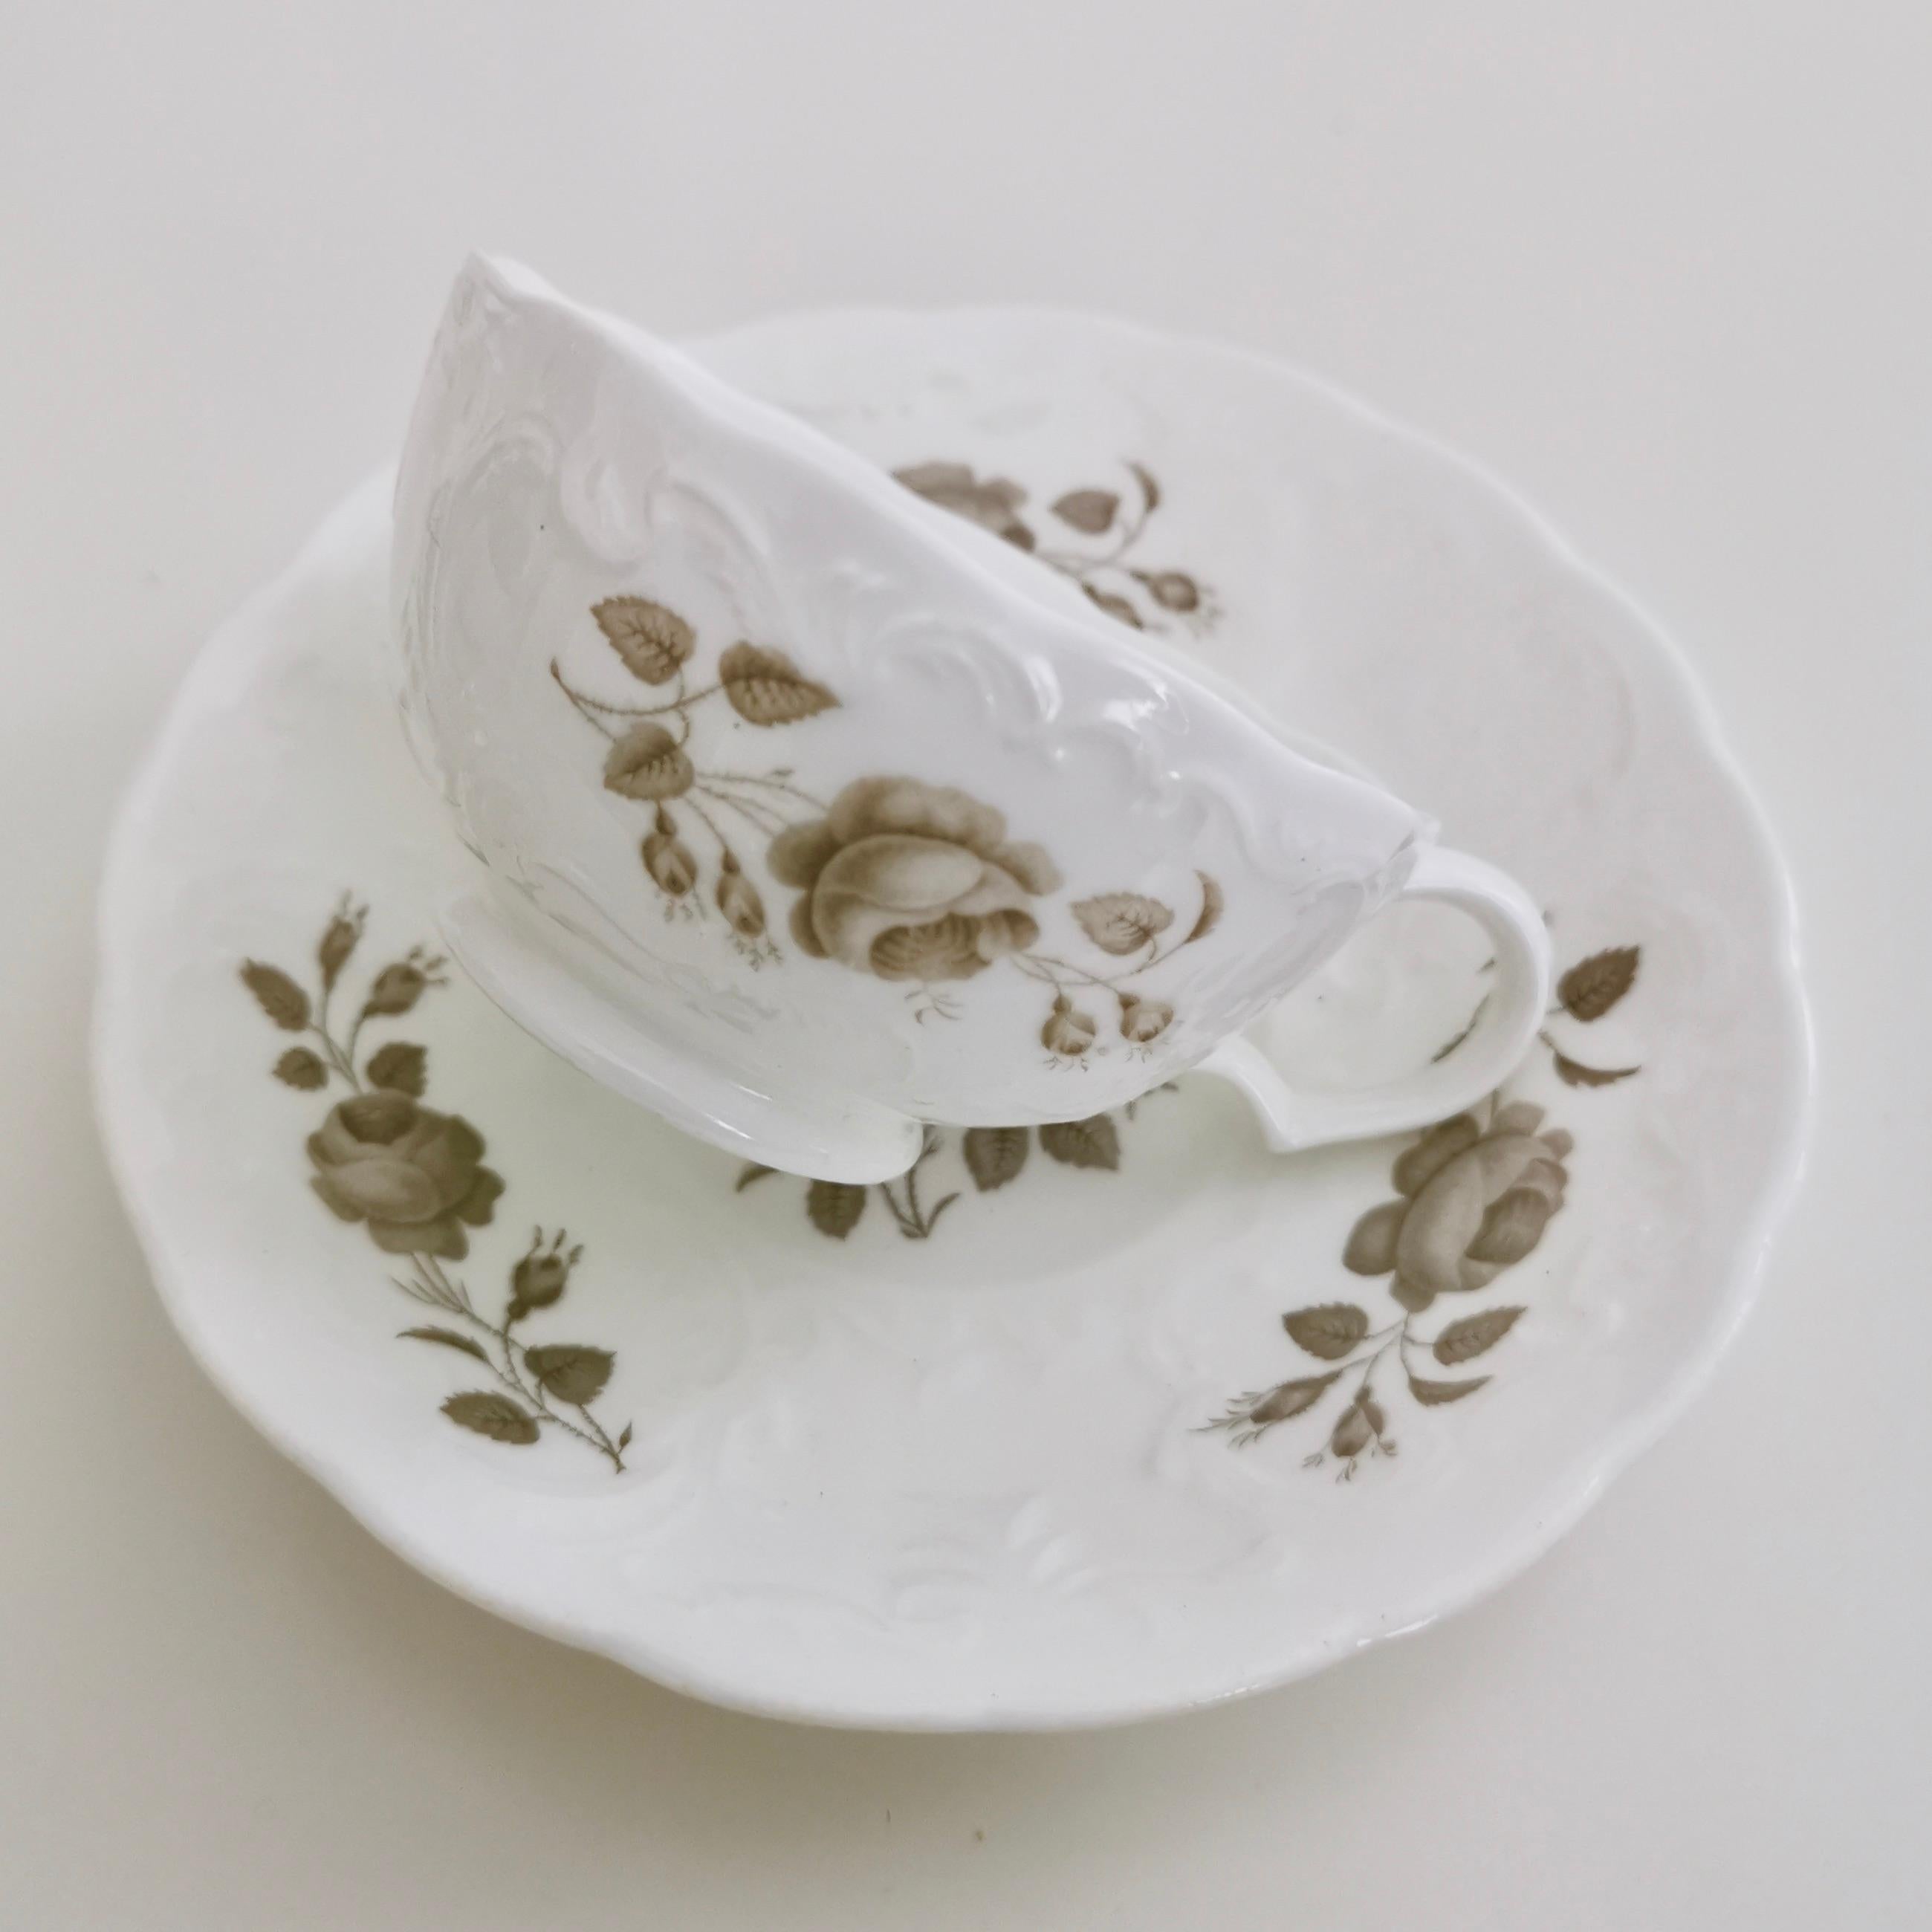 Minton Porcelain Teacup Trio, Bath Embossed White with Sepia Roses, Regency 1830 In Good Condition For Sale In London, GB